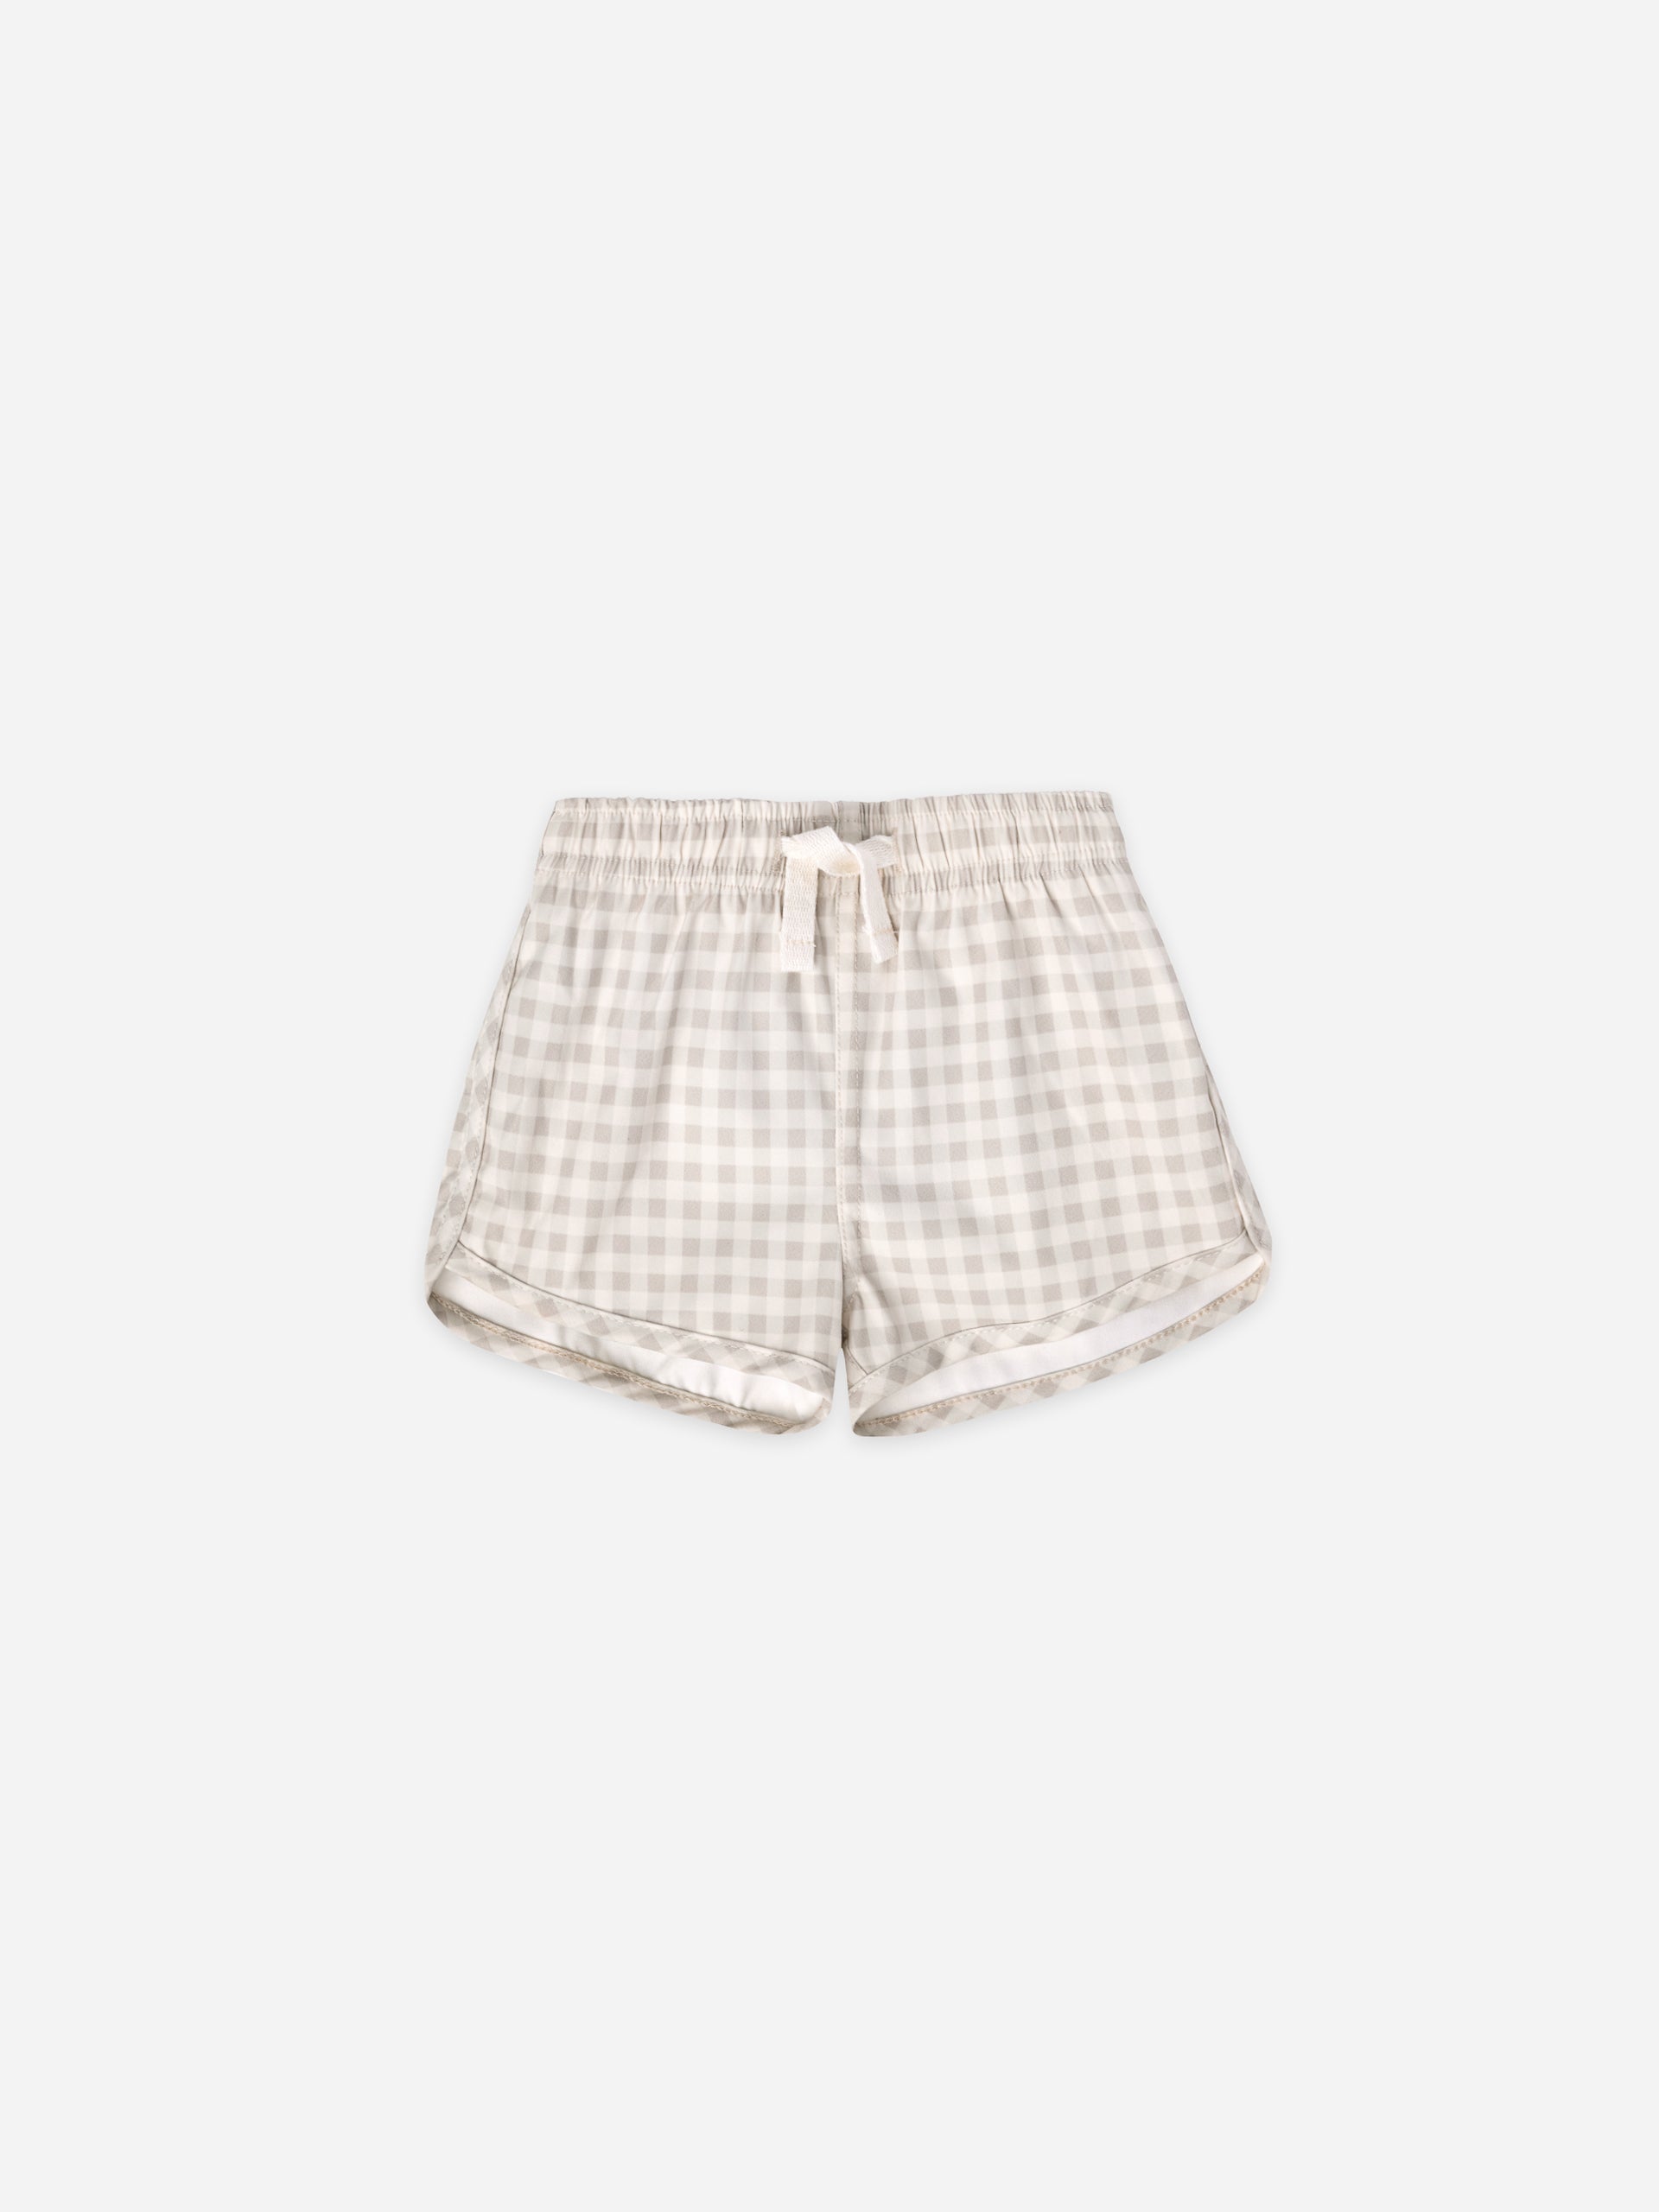 boys swim shorts | silver gingham - Quincy Mae | Baby Basics | Baby Clothing | Organic Baby Clothes | Modern Baby Boy Clothes |